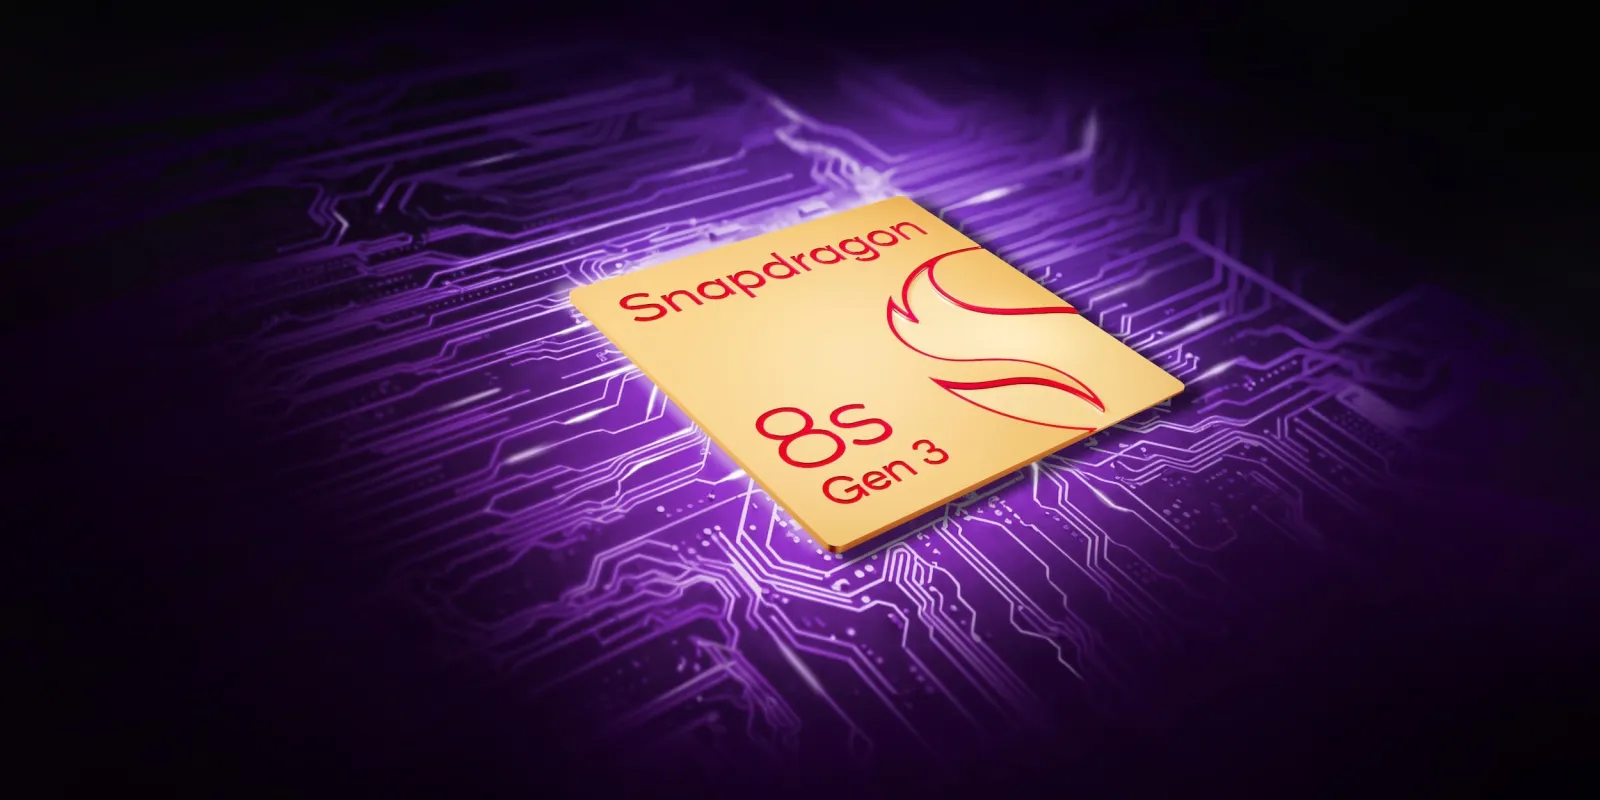 Snapdragon 8s Gen 3 offers a flagship experience at an affordable price